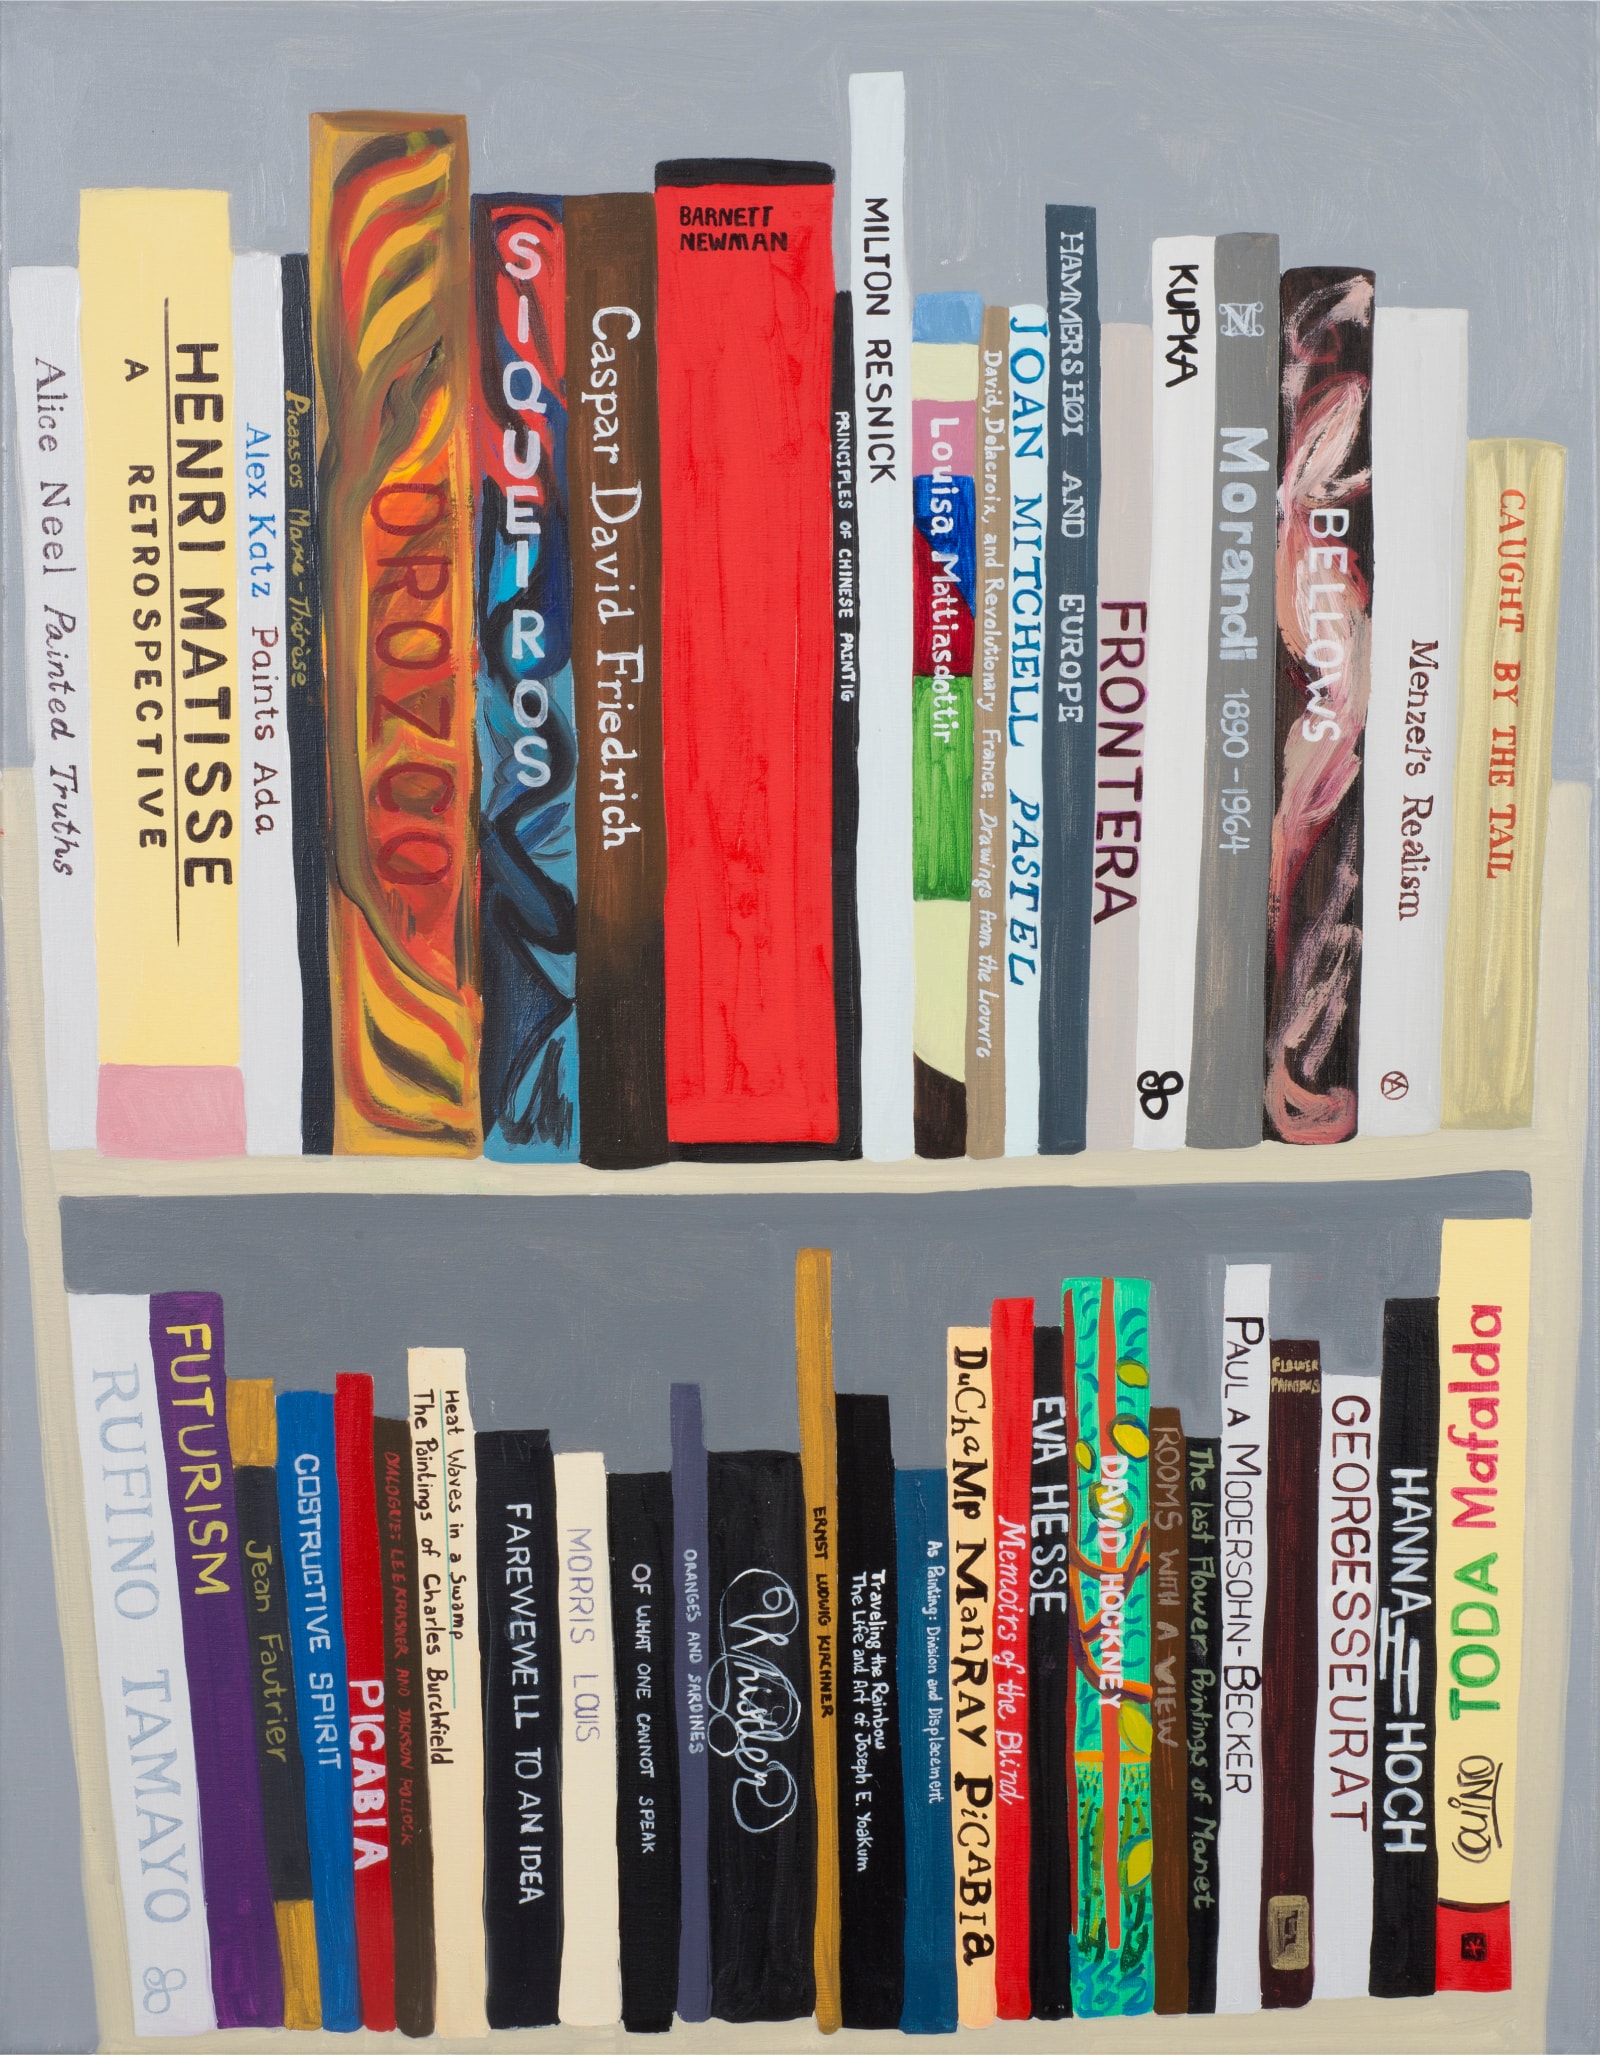 Nisenbaum’s “Reading List” featuring two selves of books on art and art history